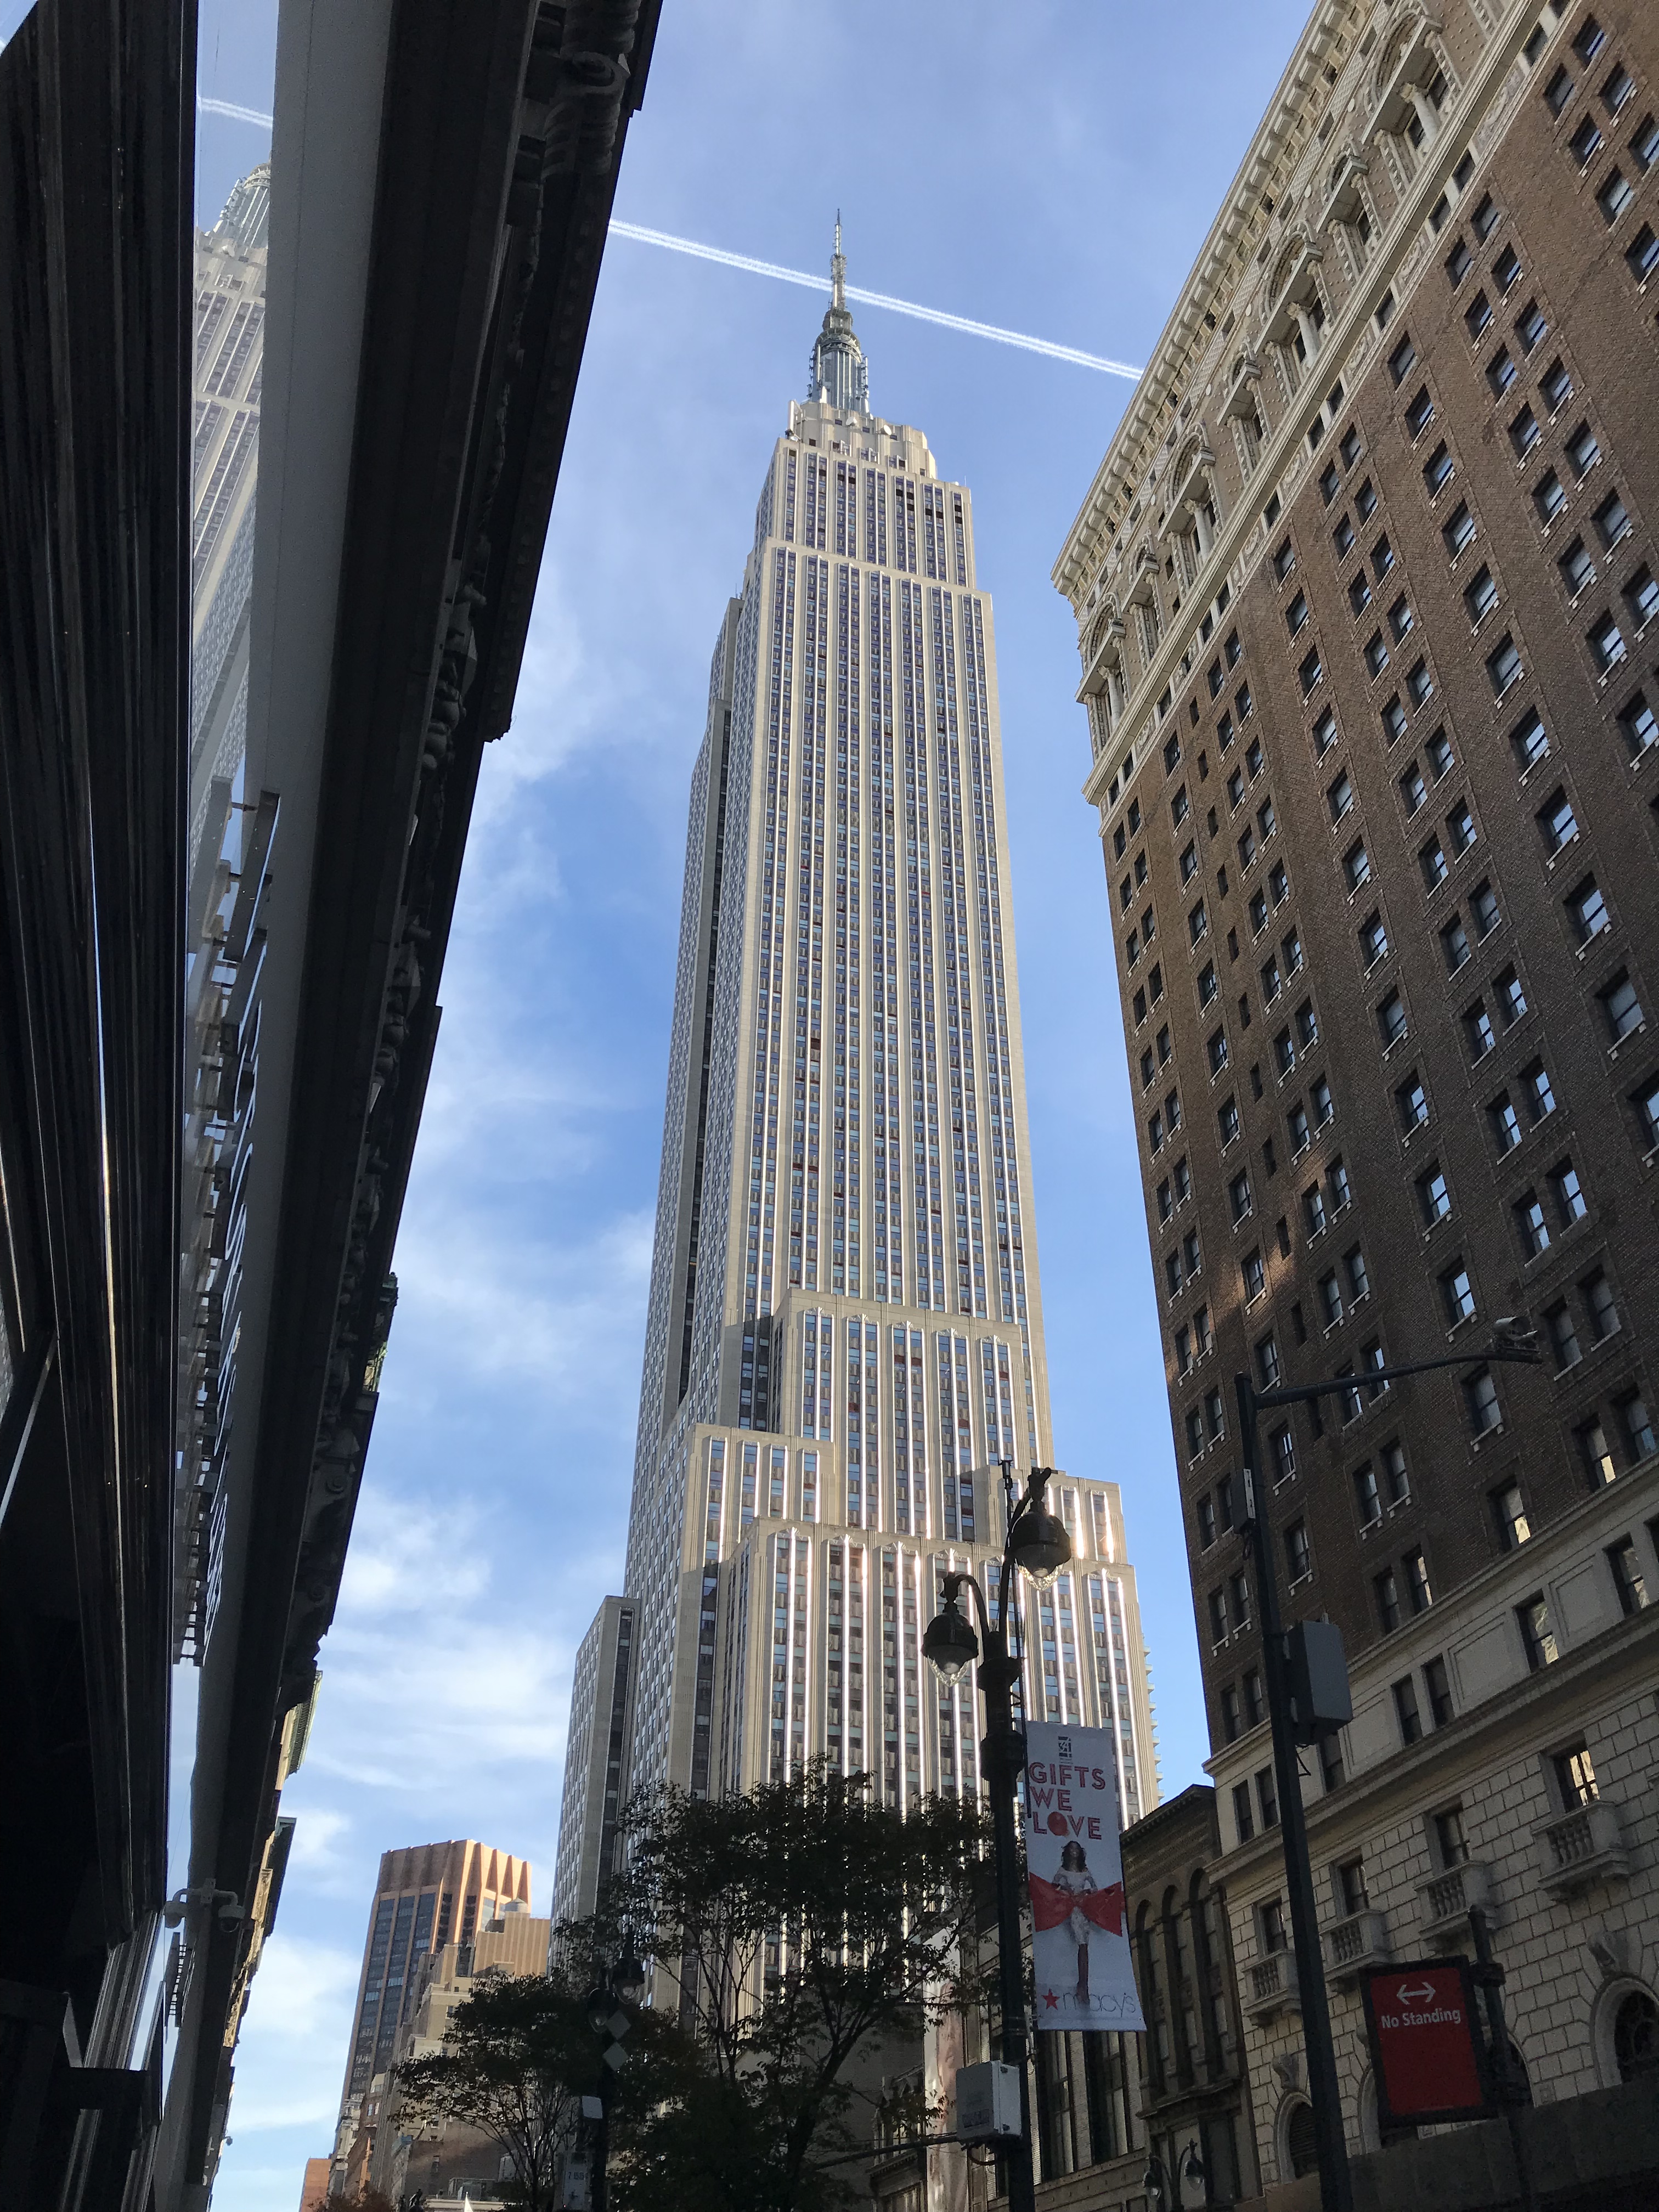 Empire state building